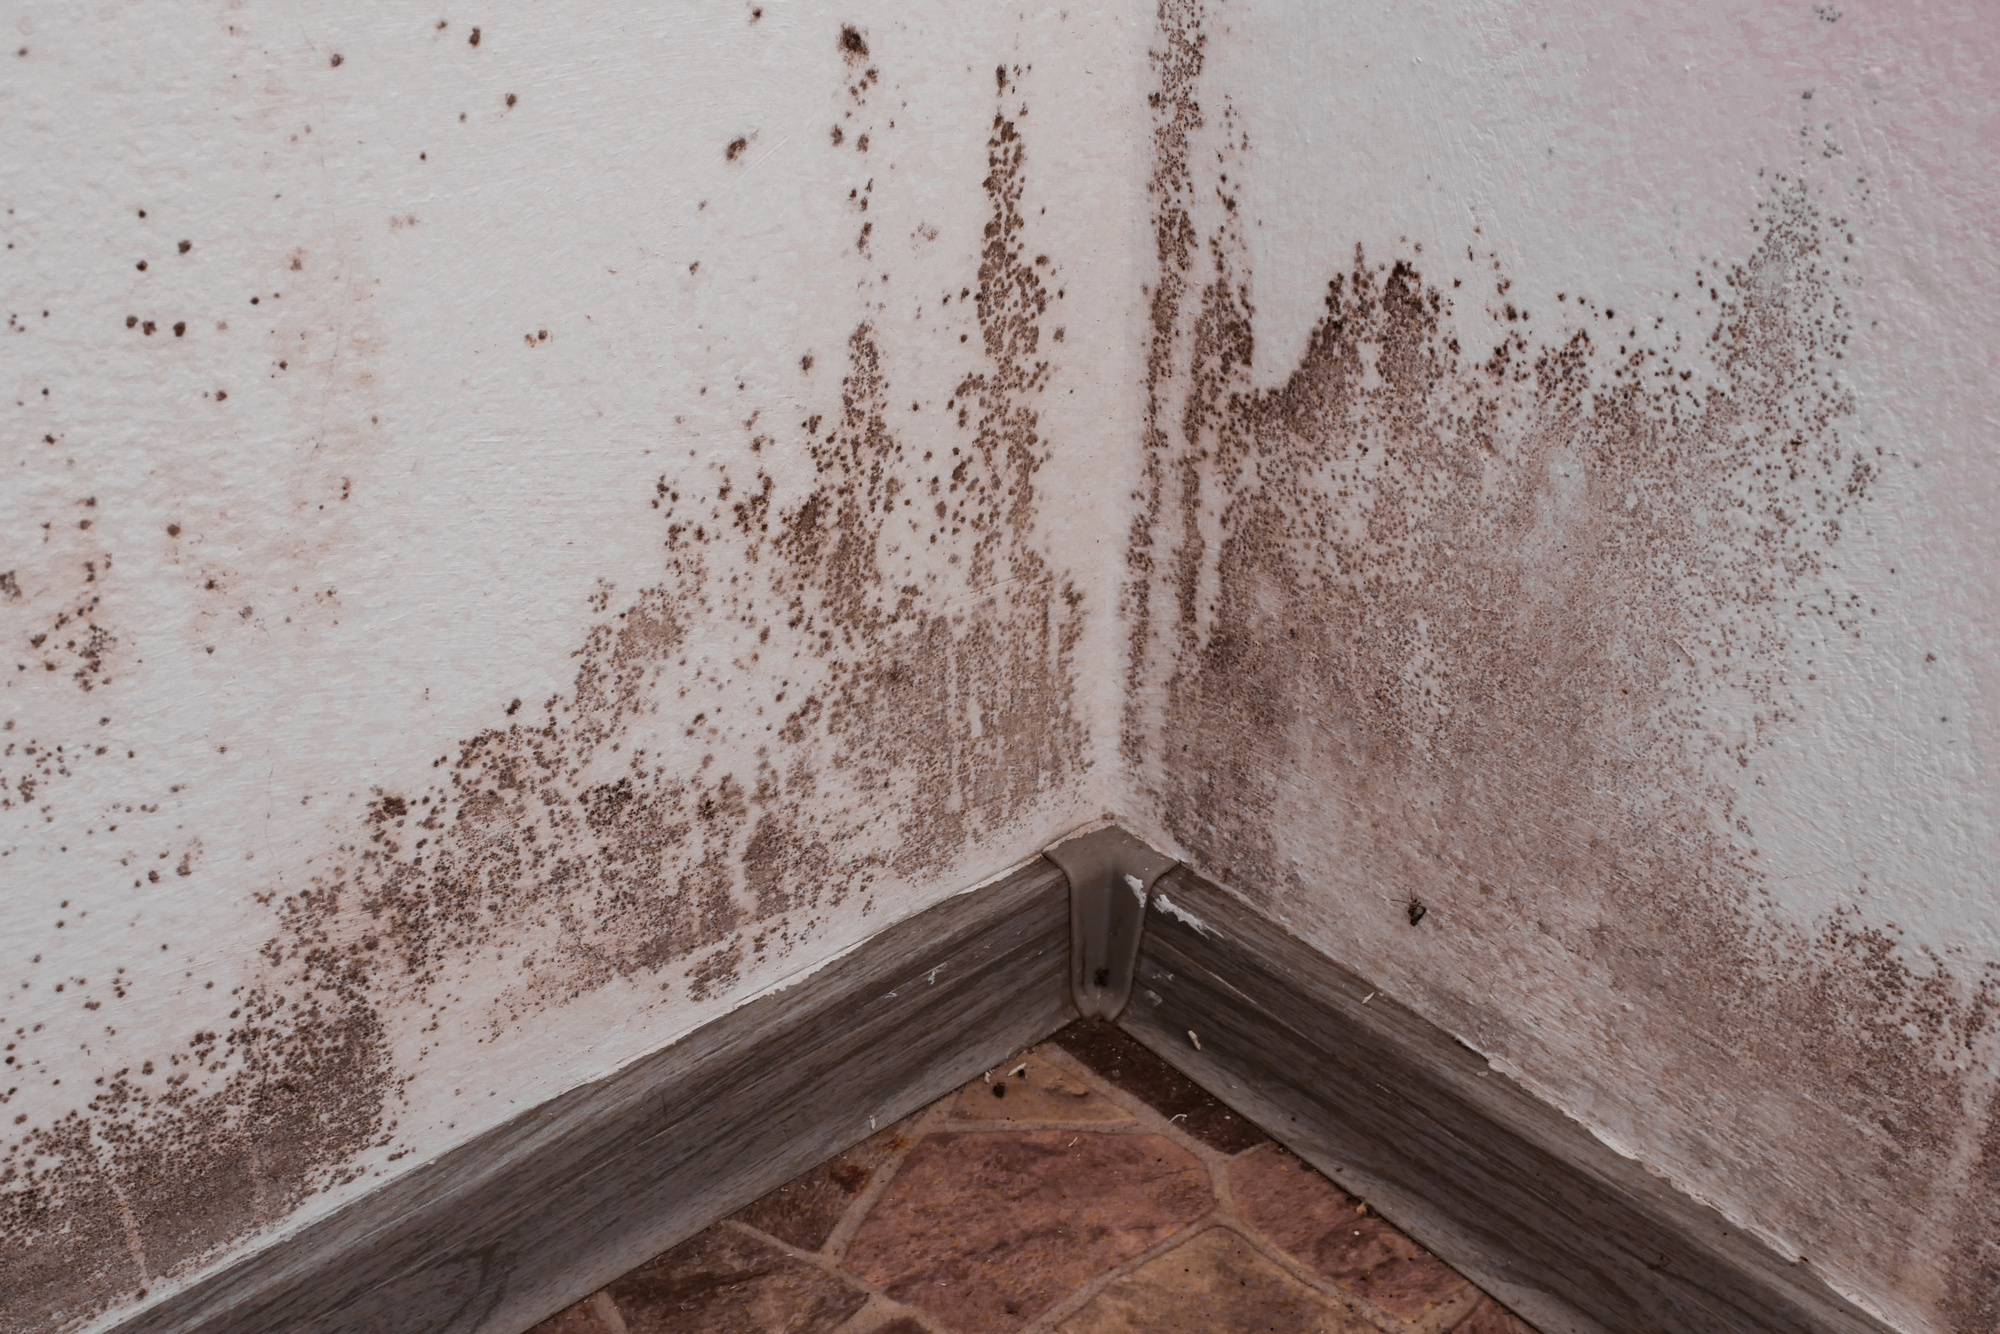 types of mold